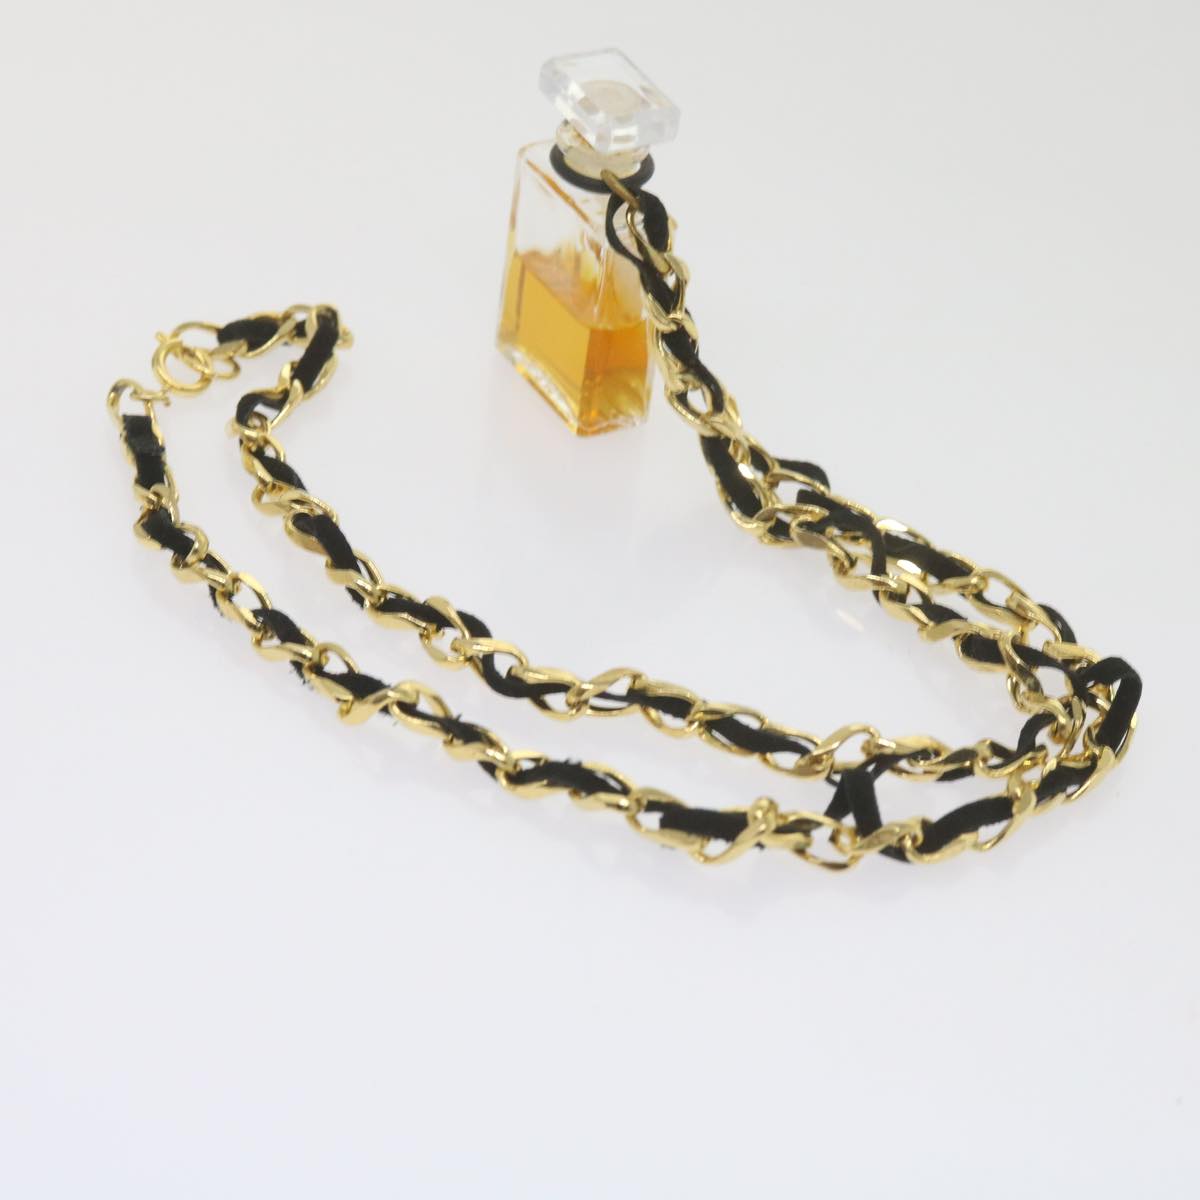 CHANEL Perfume N°5 Chain Necklace Clear Gold Tone CC Auth bs10372